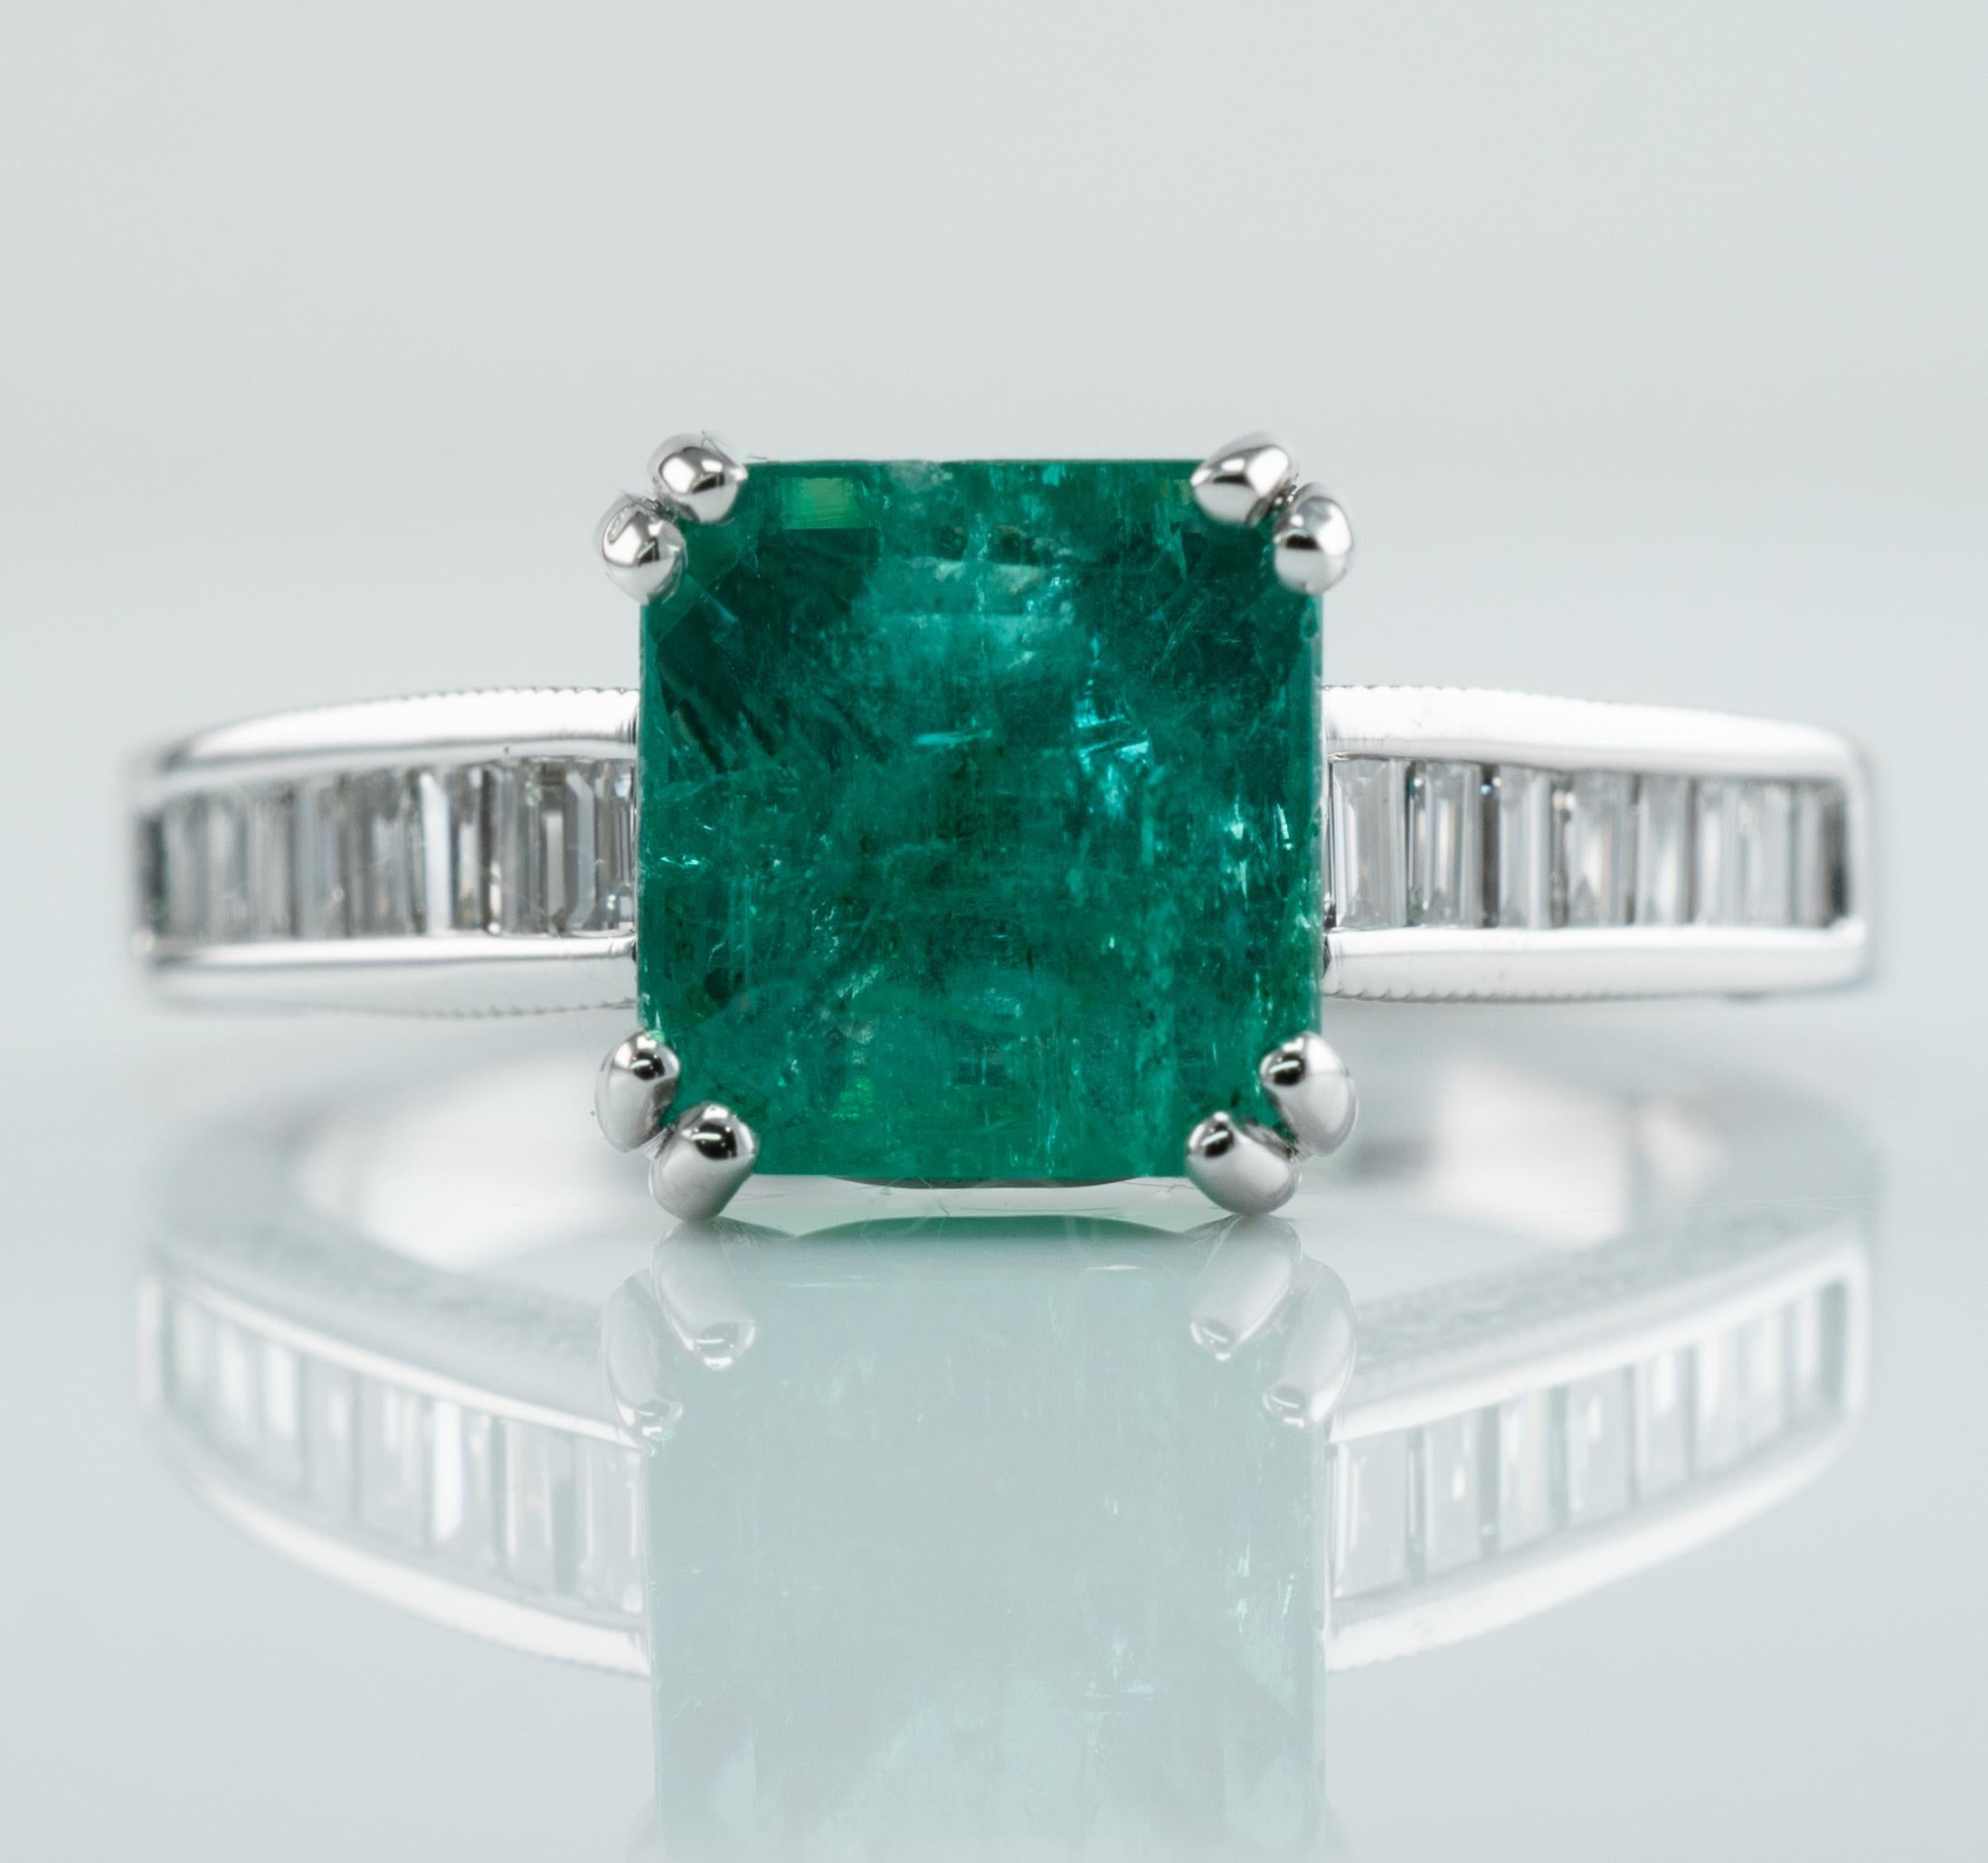 This estate ring is crafted in solid 14K White Gold and set with genuine Earth mined Emerald and Diamonds.
The center square cut Colombian Emerald measures 7mm x 7mm (about 1.70 carat).
This is a good quality gem with natural inclusions.
It has some